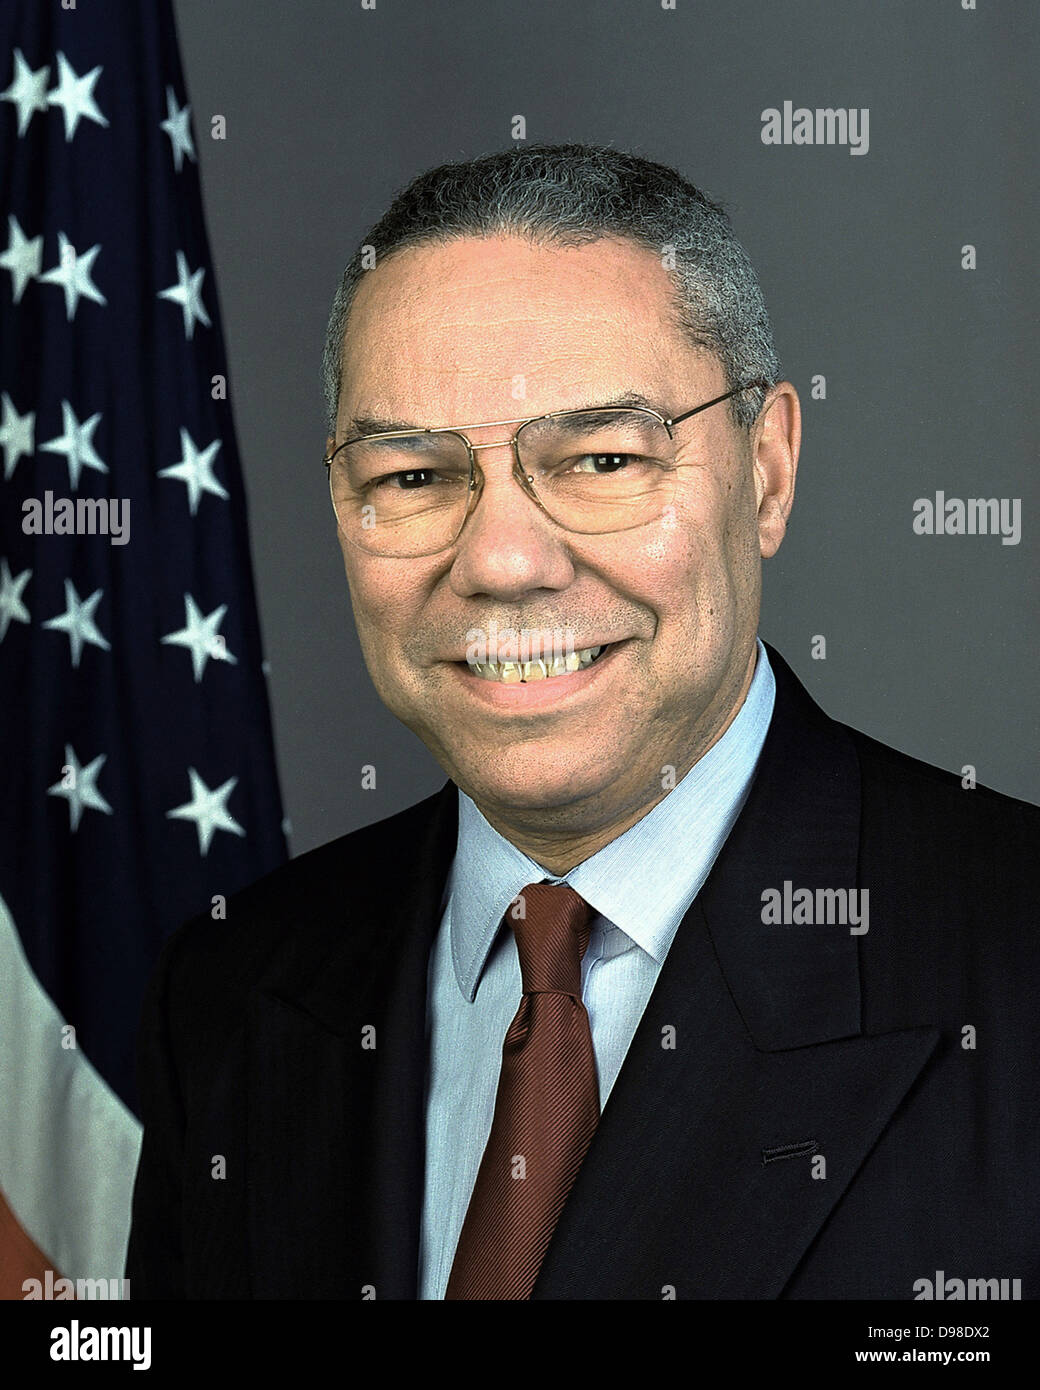 Colin Luther Powell (born 1937) African American soldier and statesman. United States Secretary of State 2001-2005. Formal head-and-shoulders photograph Stock Photo